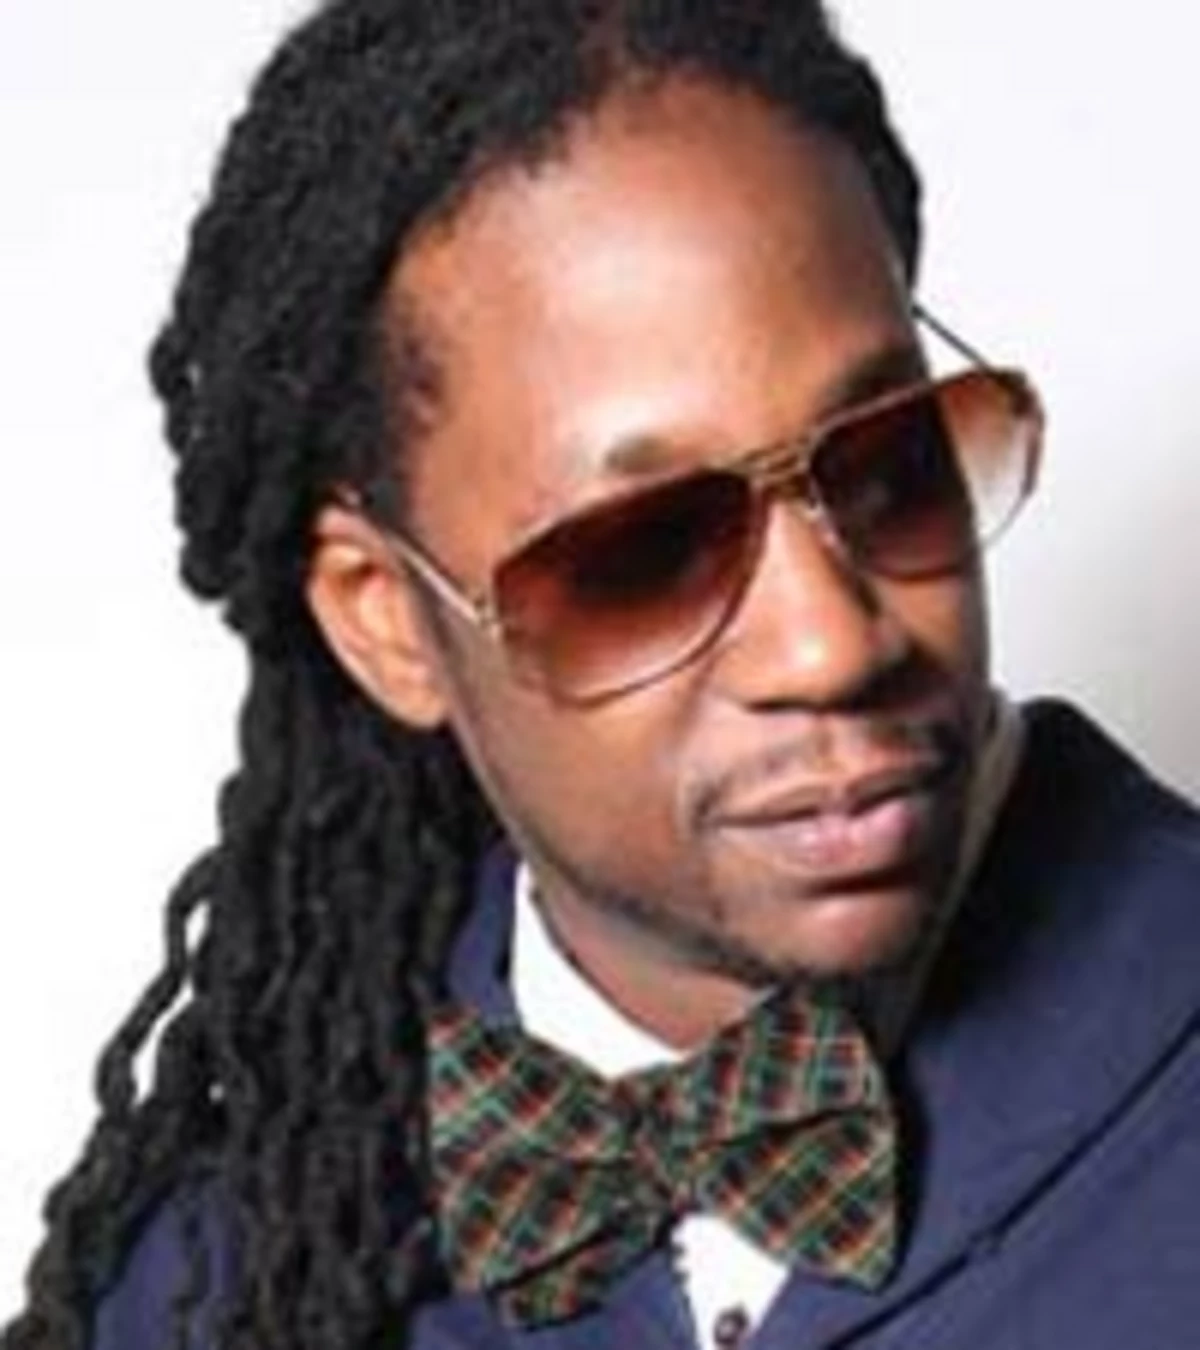 Rap Genius Lines of the Week From 2 Chainz, Too $hort, Gucci Mane